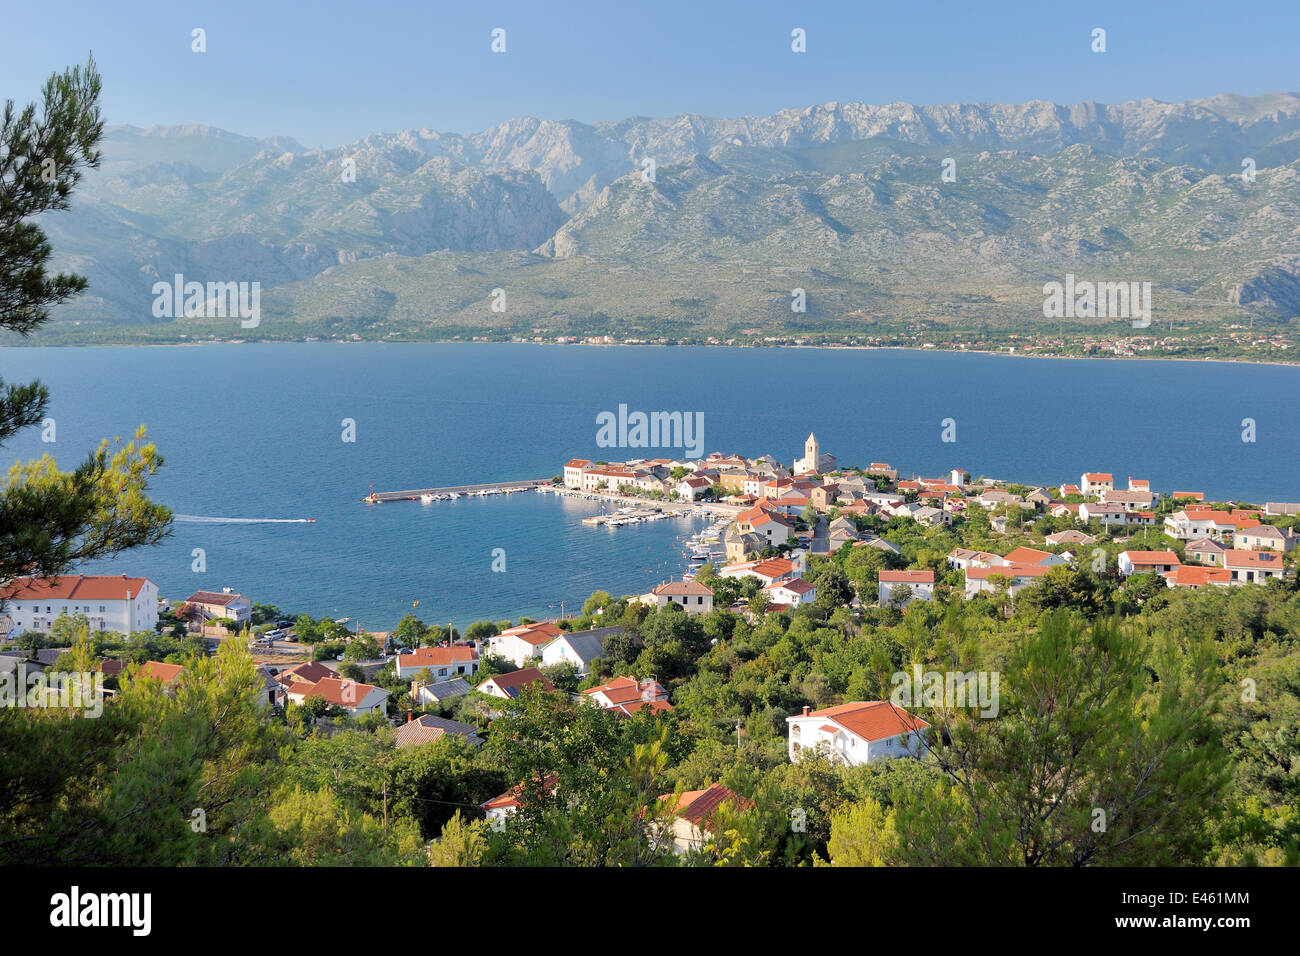 Overview of Vinjerac fishing village and harbour with Pine trees (Pinus sp.) in the foreground and the karst limestone Velebit mountain range of the Dinaric Alps in the background, Zadar province, Croatia, July 2010. Stock Photo